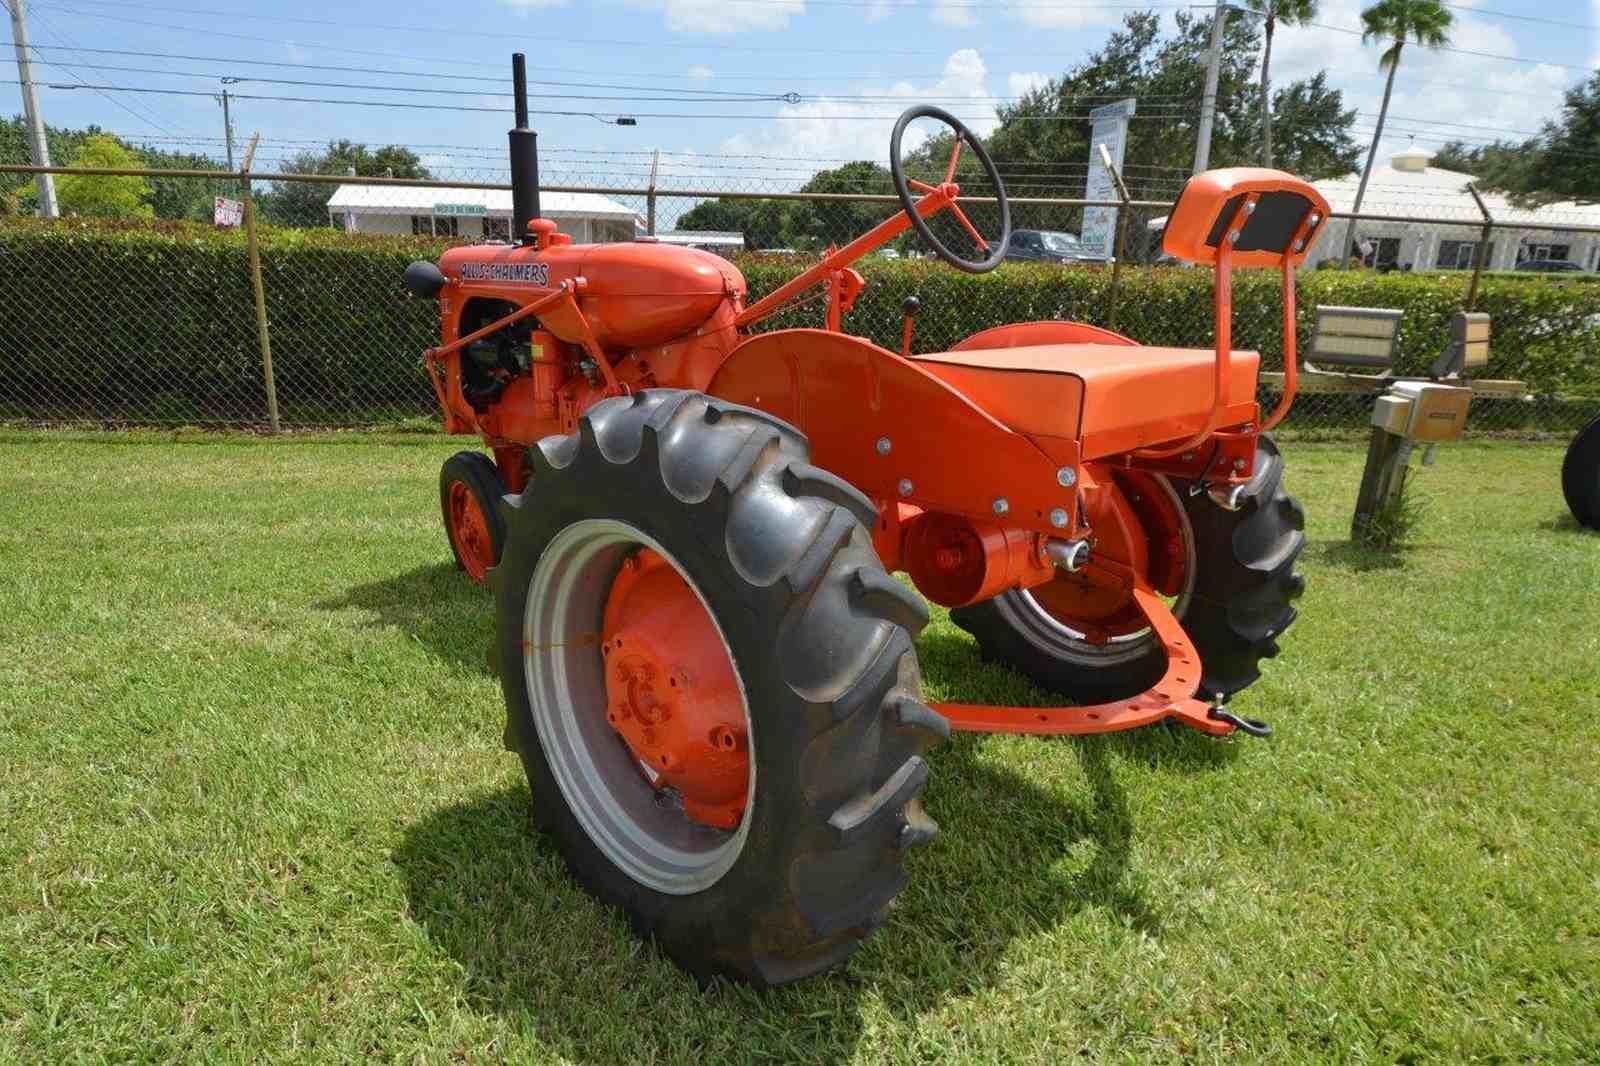 Allis Chalmers "C" Tractor, s/n C72207: Tri Front End, 1949 Year Model